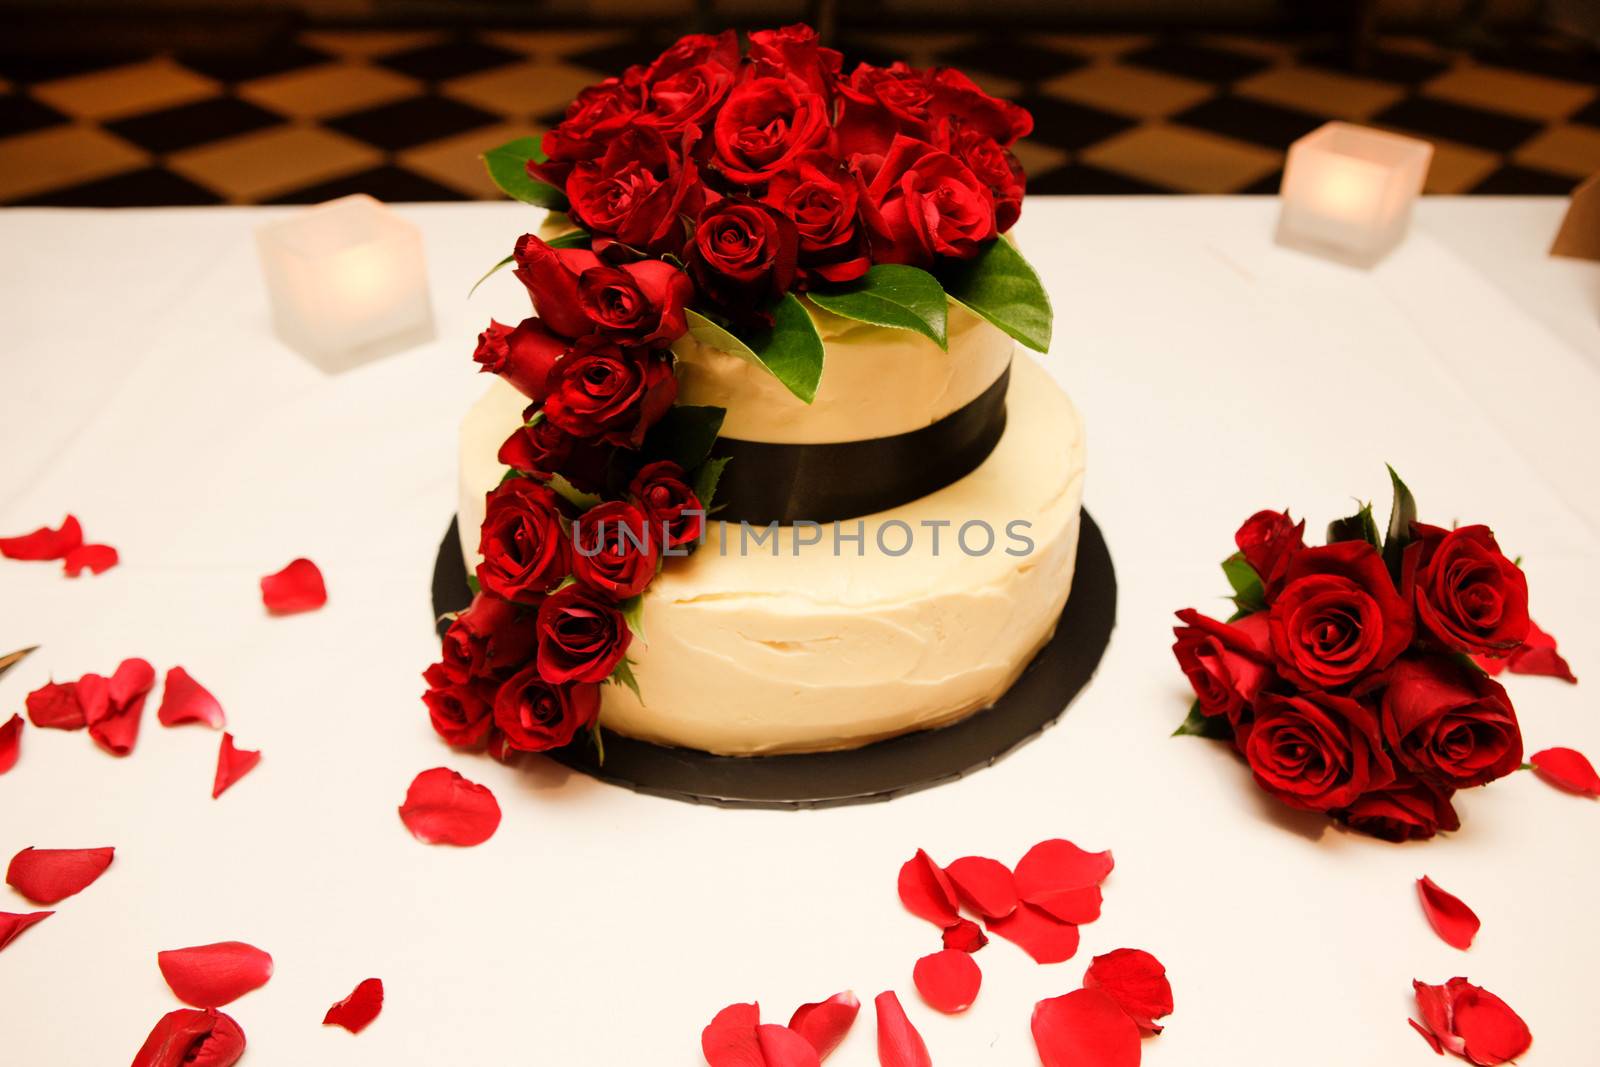 Table with a wedding cake decorated with red roses